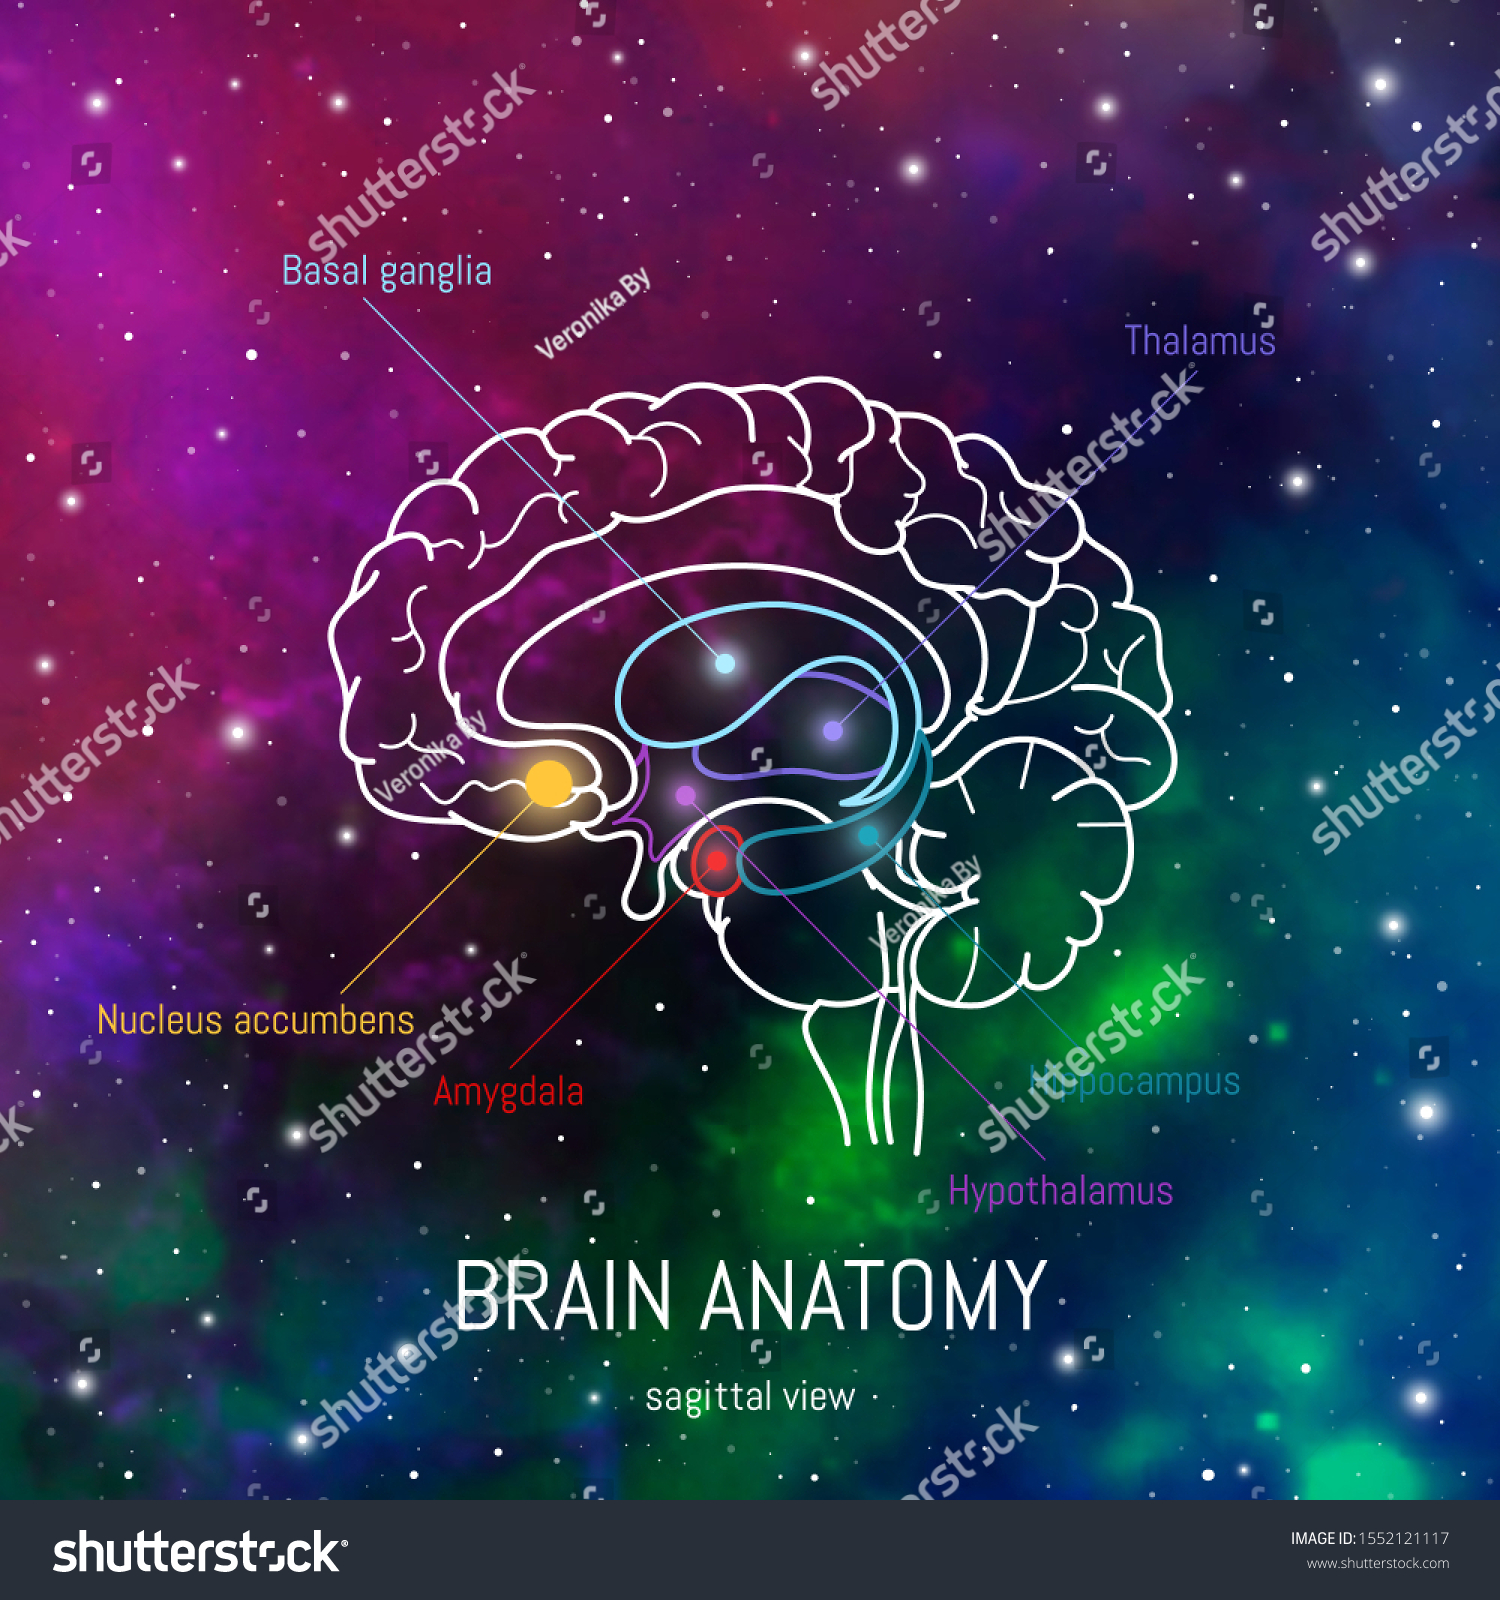 SVG of Neuroscience infographic on space background. Human brain lobes and sections illustration. Brain anatomy structure cross section. Neurobiology scientific medical vector in front of futuristic cosmos svg